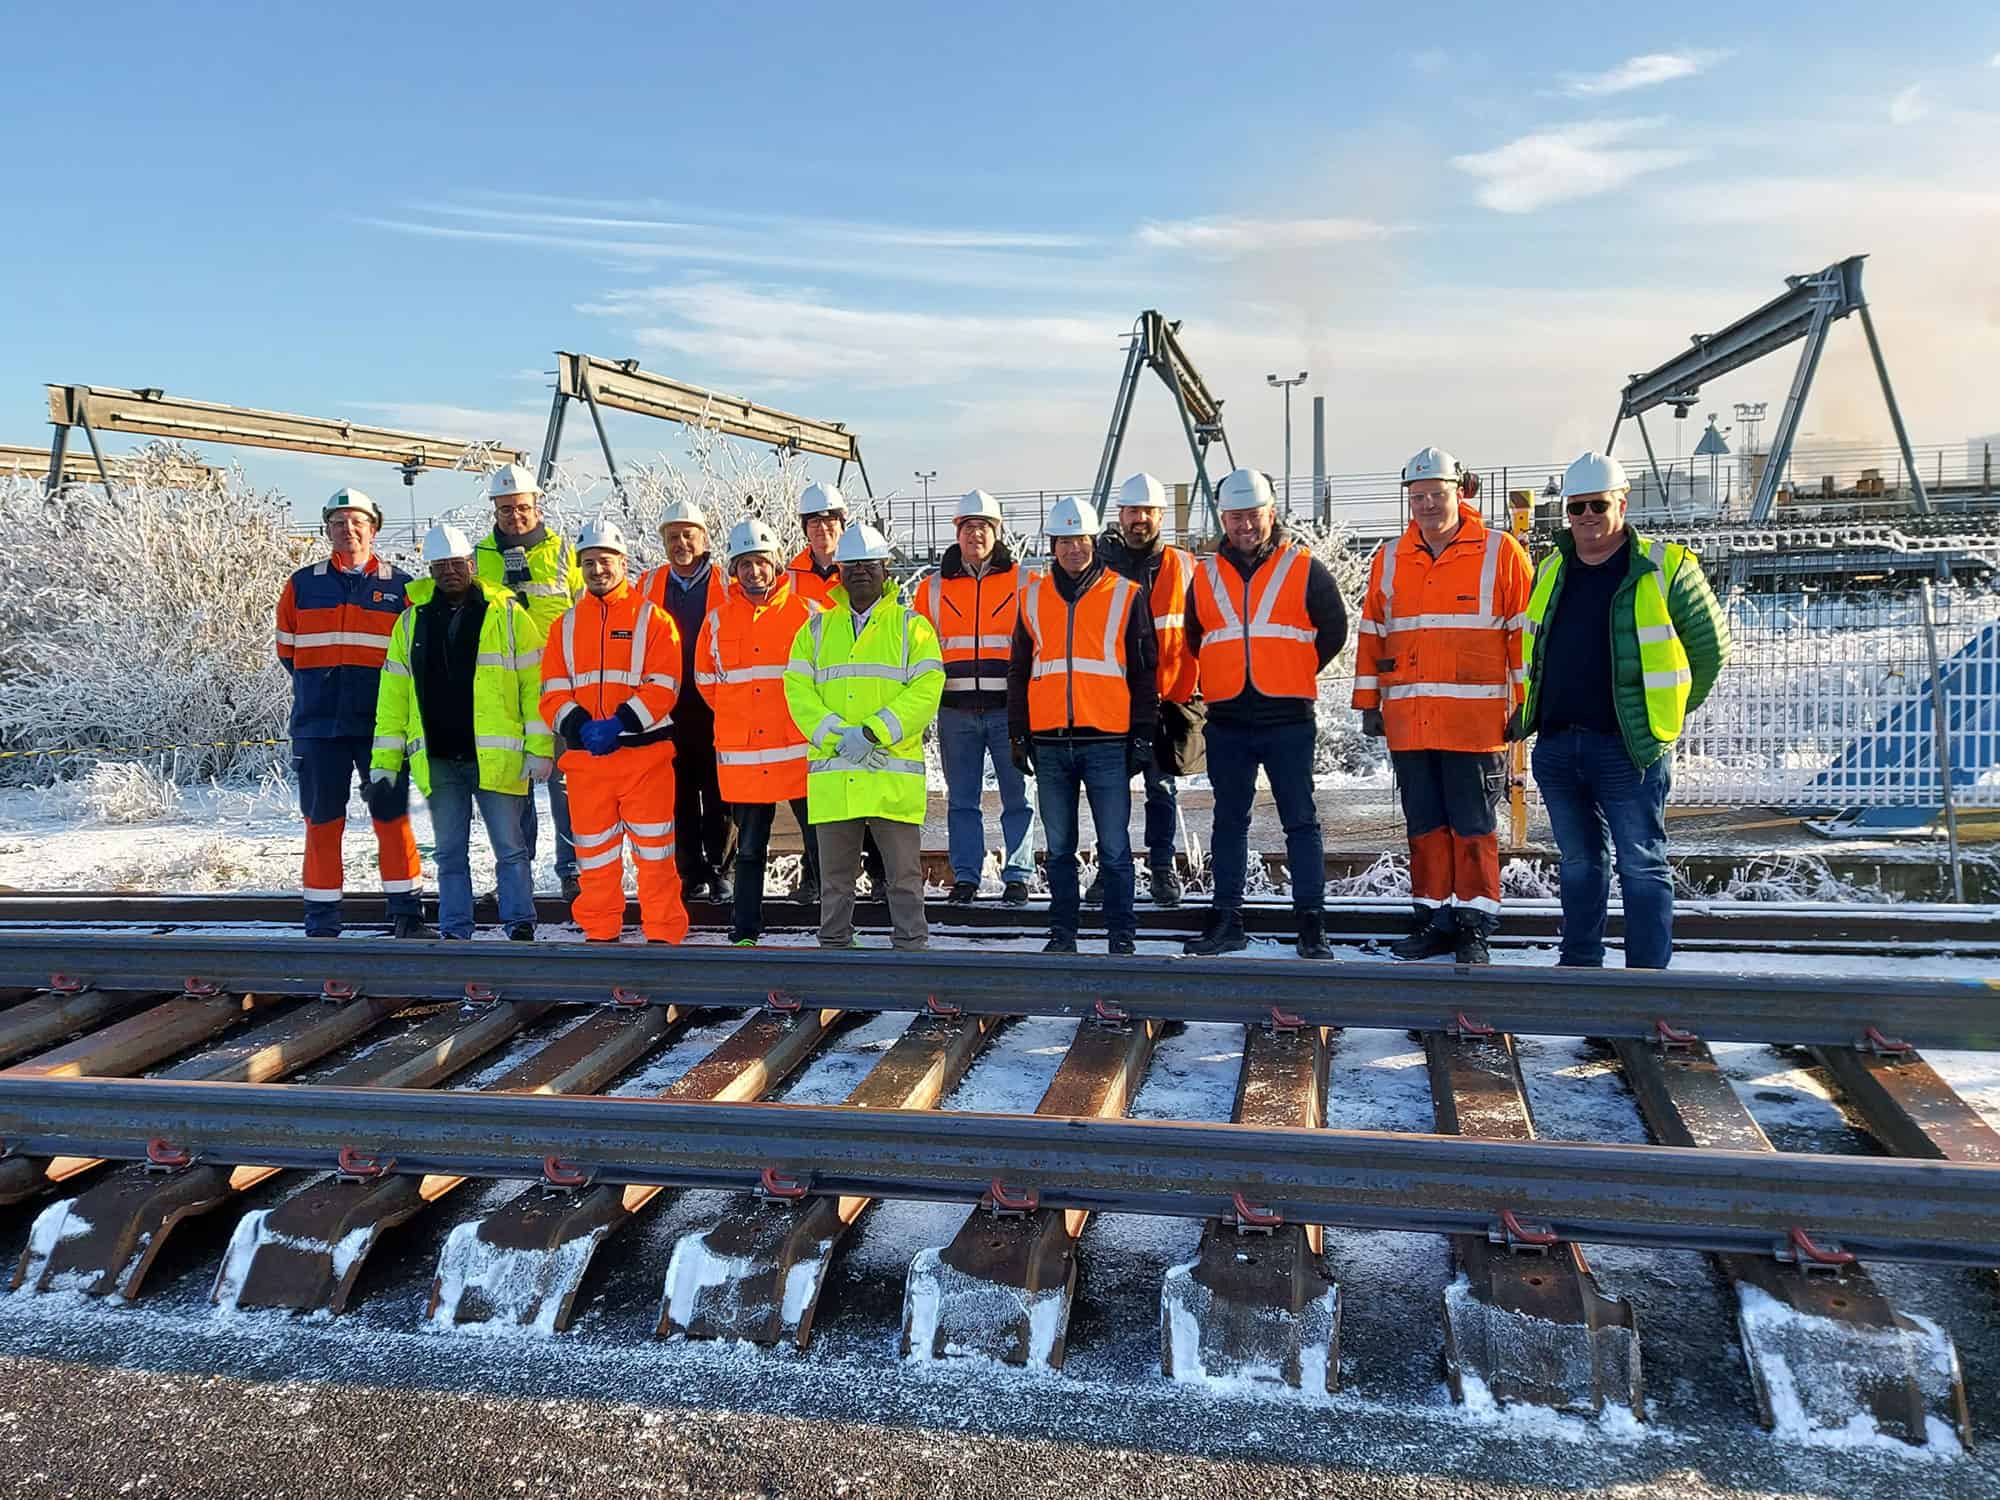 British Steel Secures Major Export Deal With Largest Ever Order For Rail Sleepers